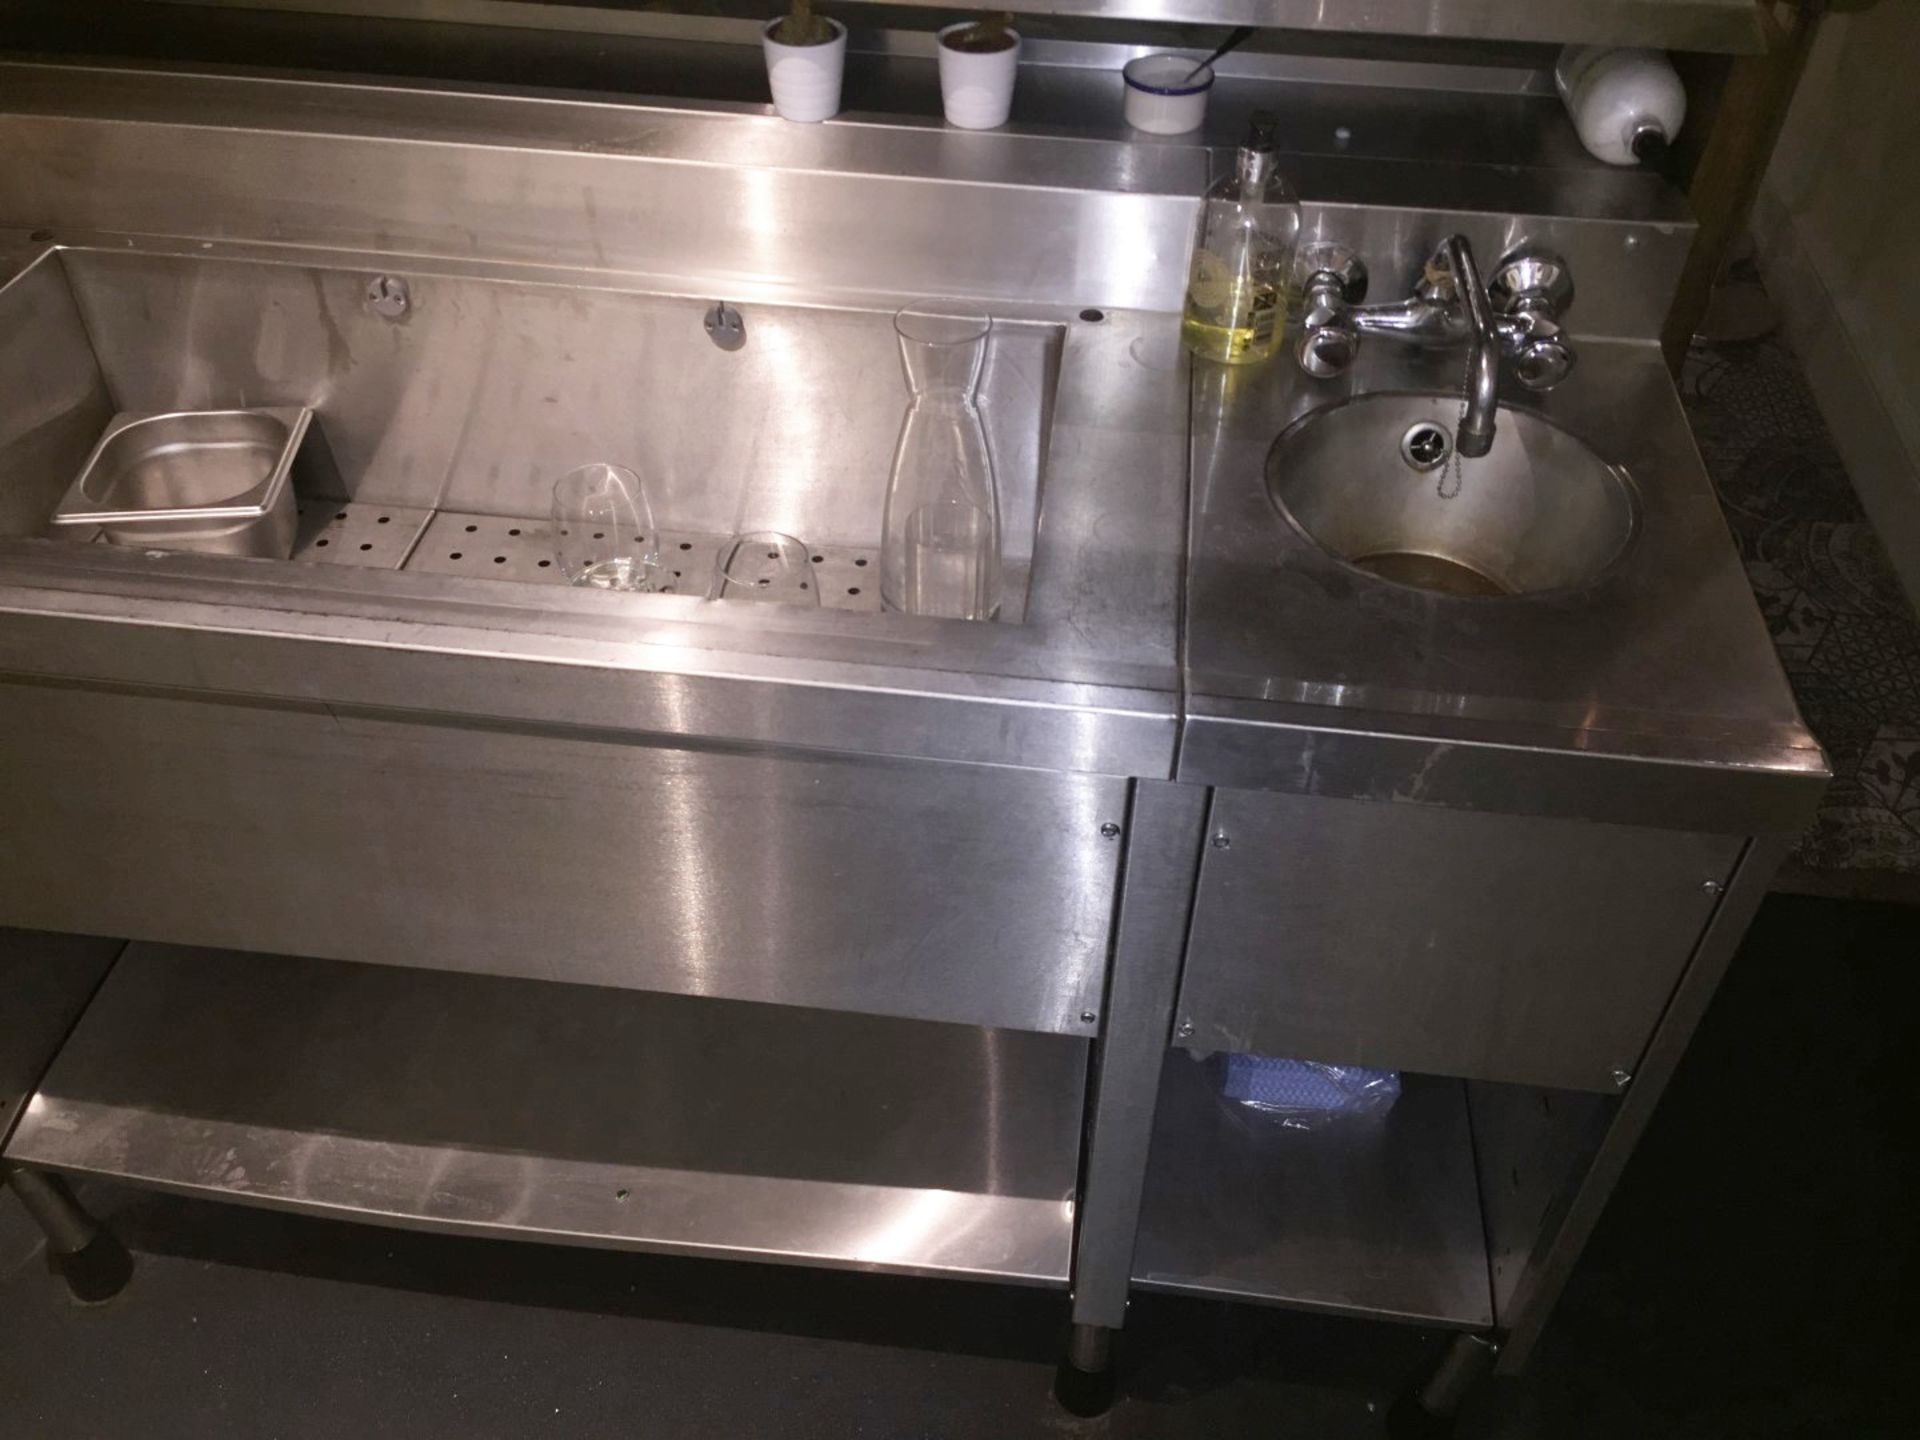 1 x Stainless Steel Commercial Wash Station Area - 251cm x 70 x H92- Dimensions: - Ref: WS/GF031 - O - Image 3 of 4